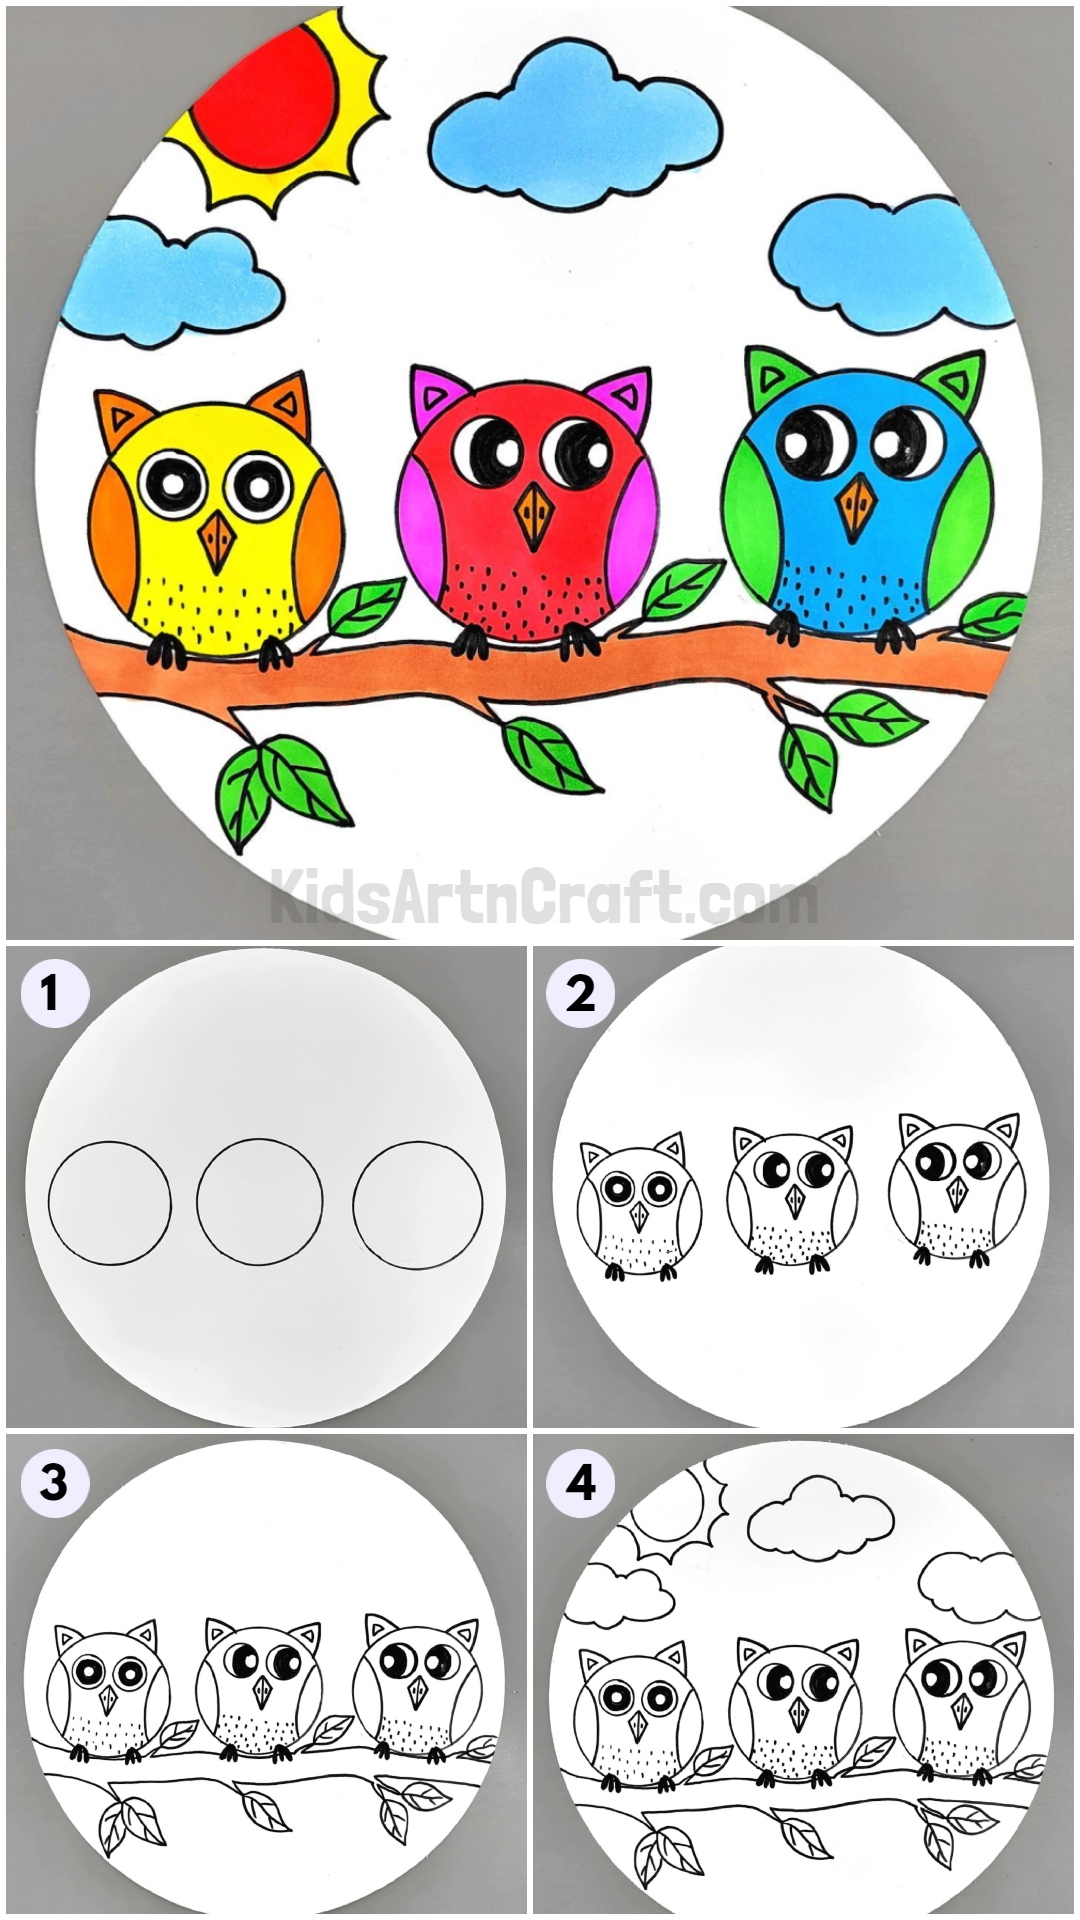 Draw a group of owls easy Tutorial for Kids